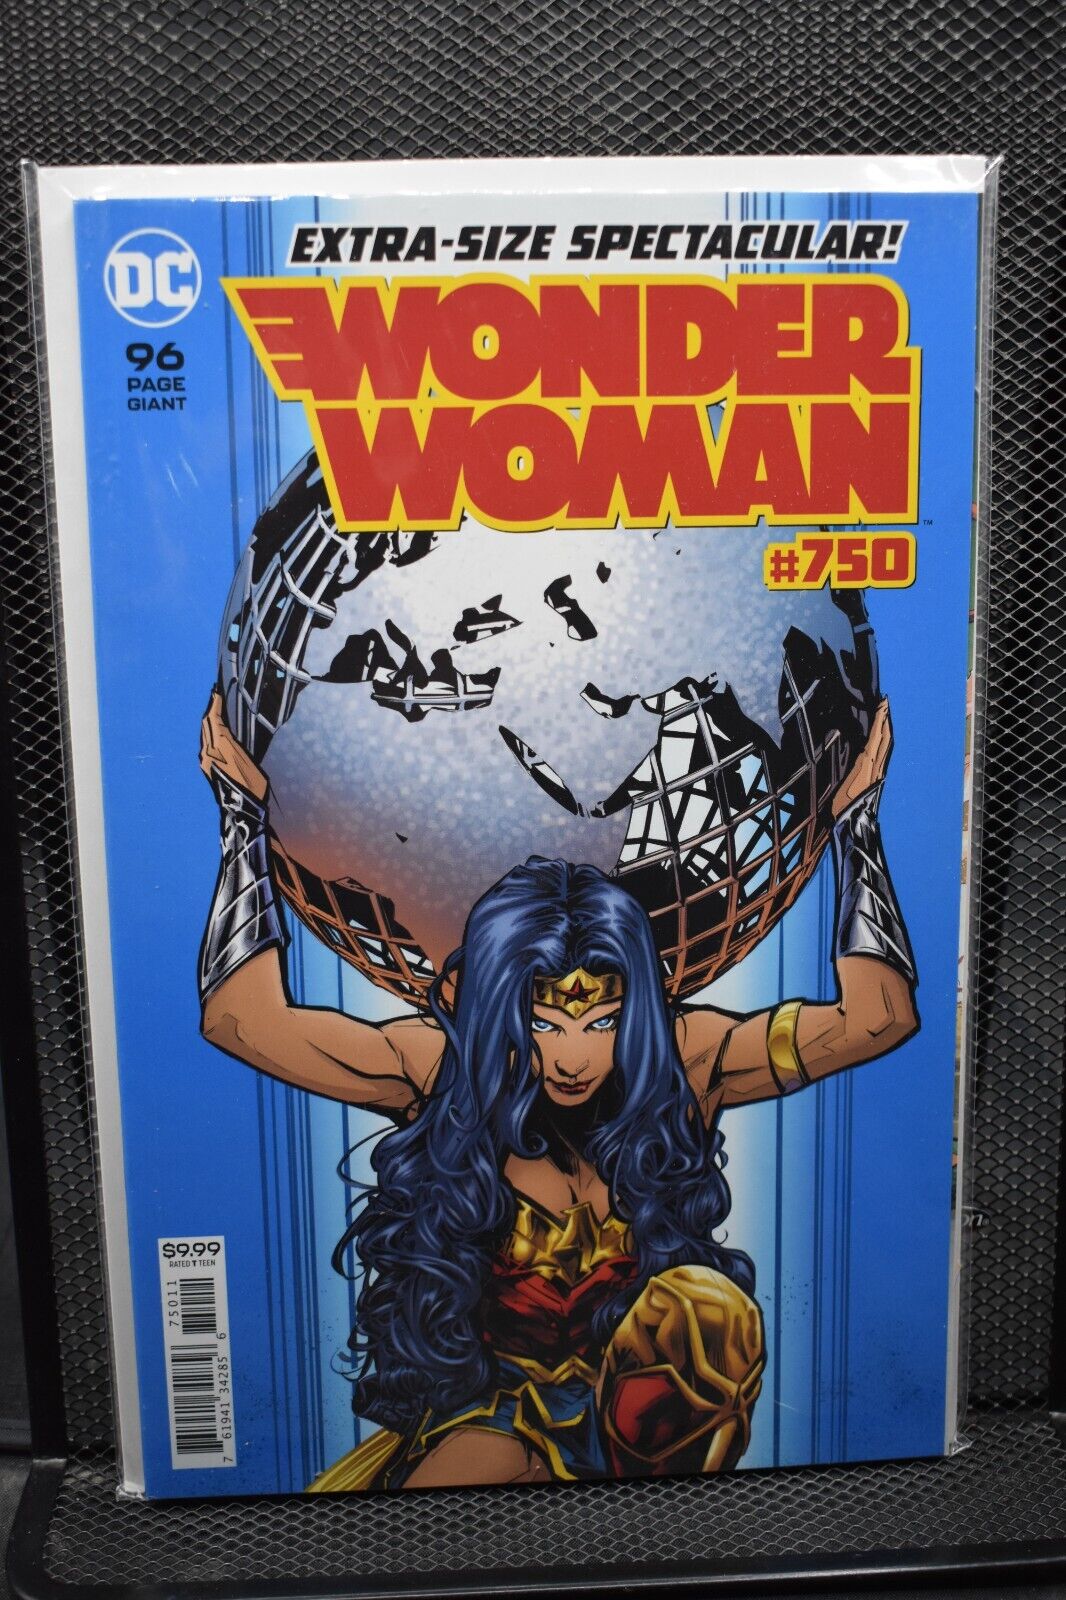 Wonder Woman #750 Joelle Jones Cover A DC 2020 96 Page Giant Spectacular 9.6